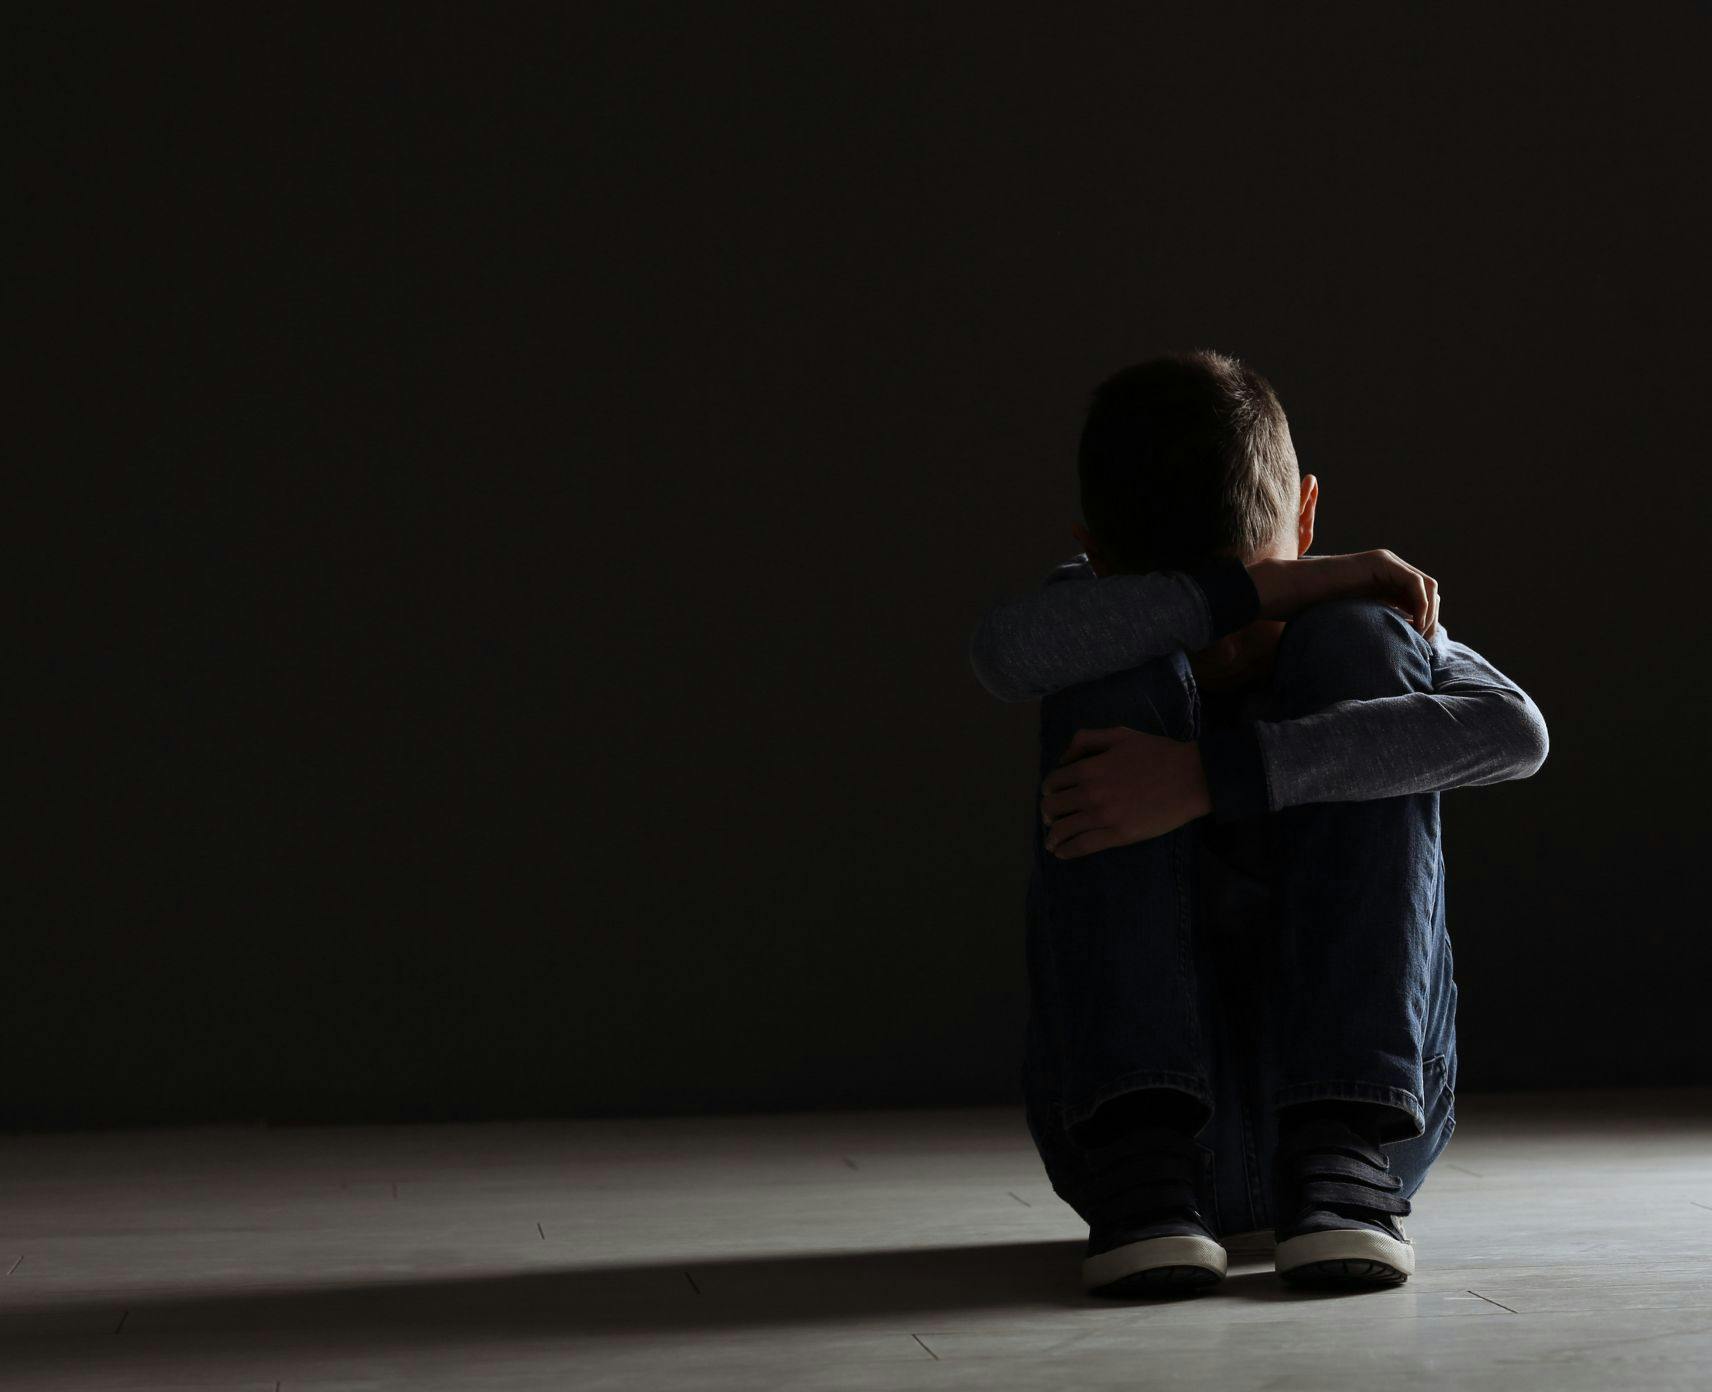 A child sits with their head down against a dark background.